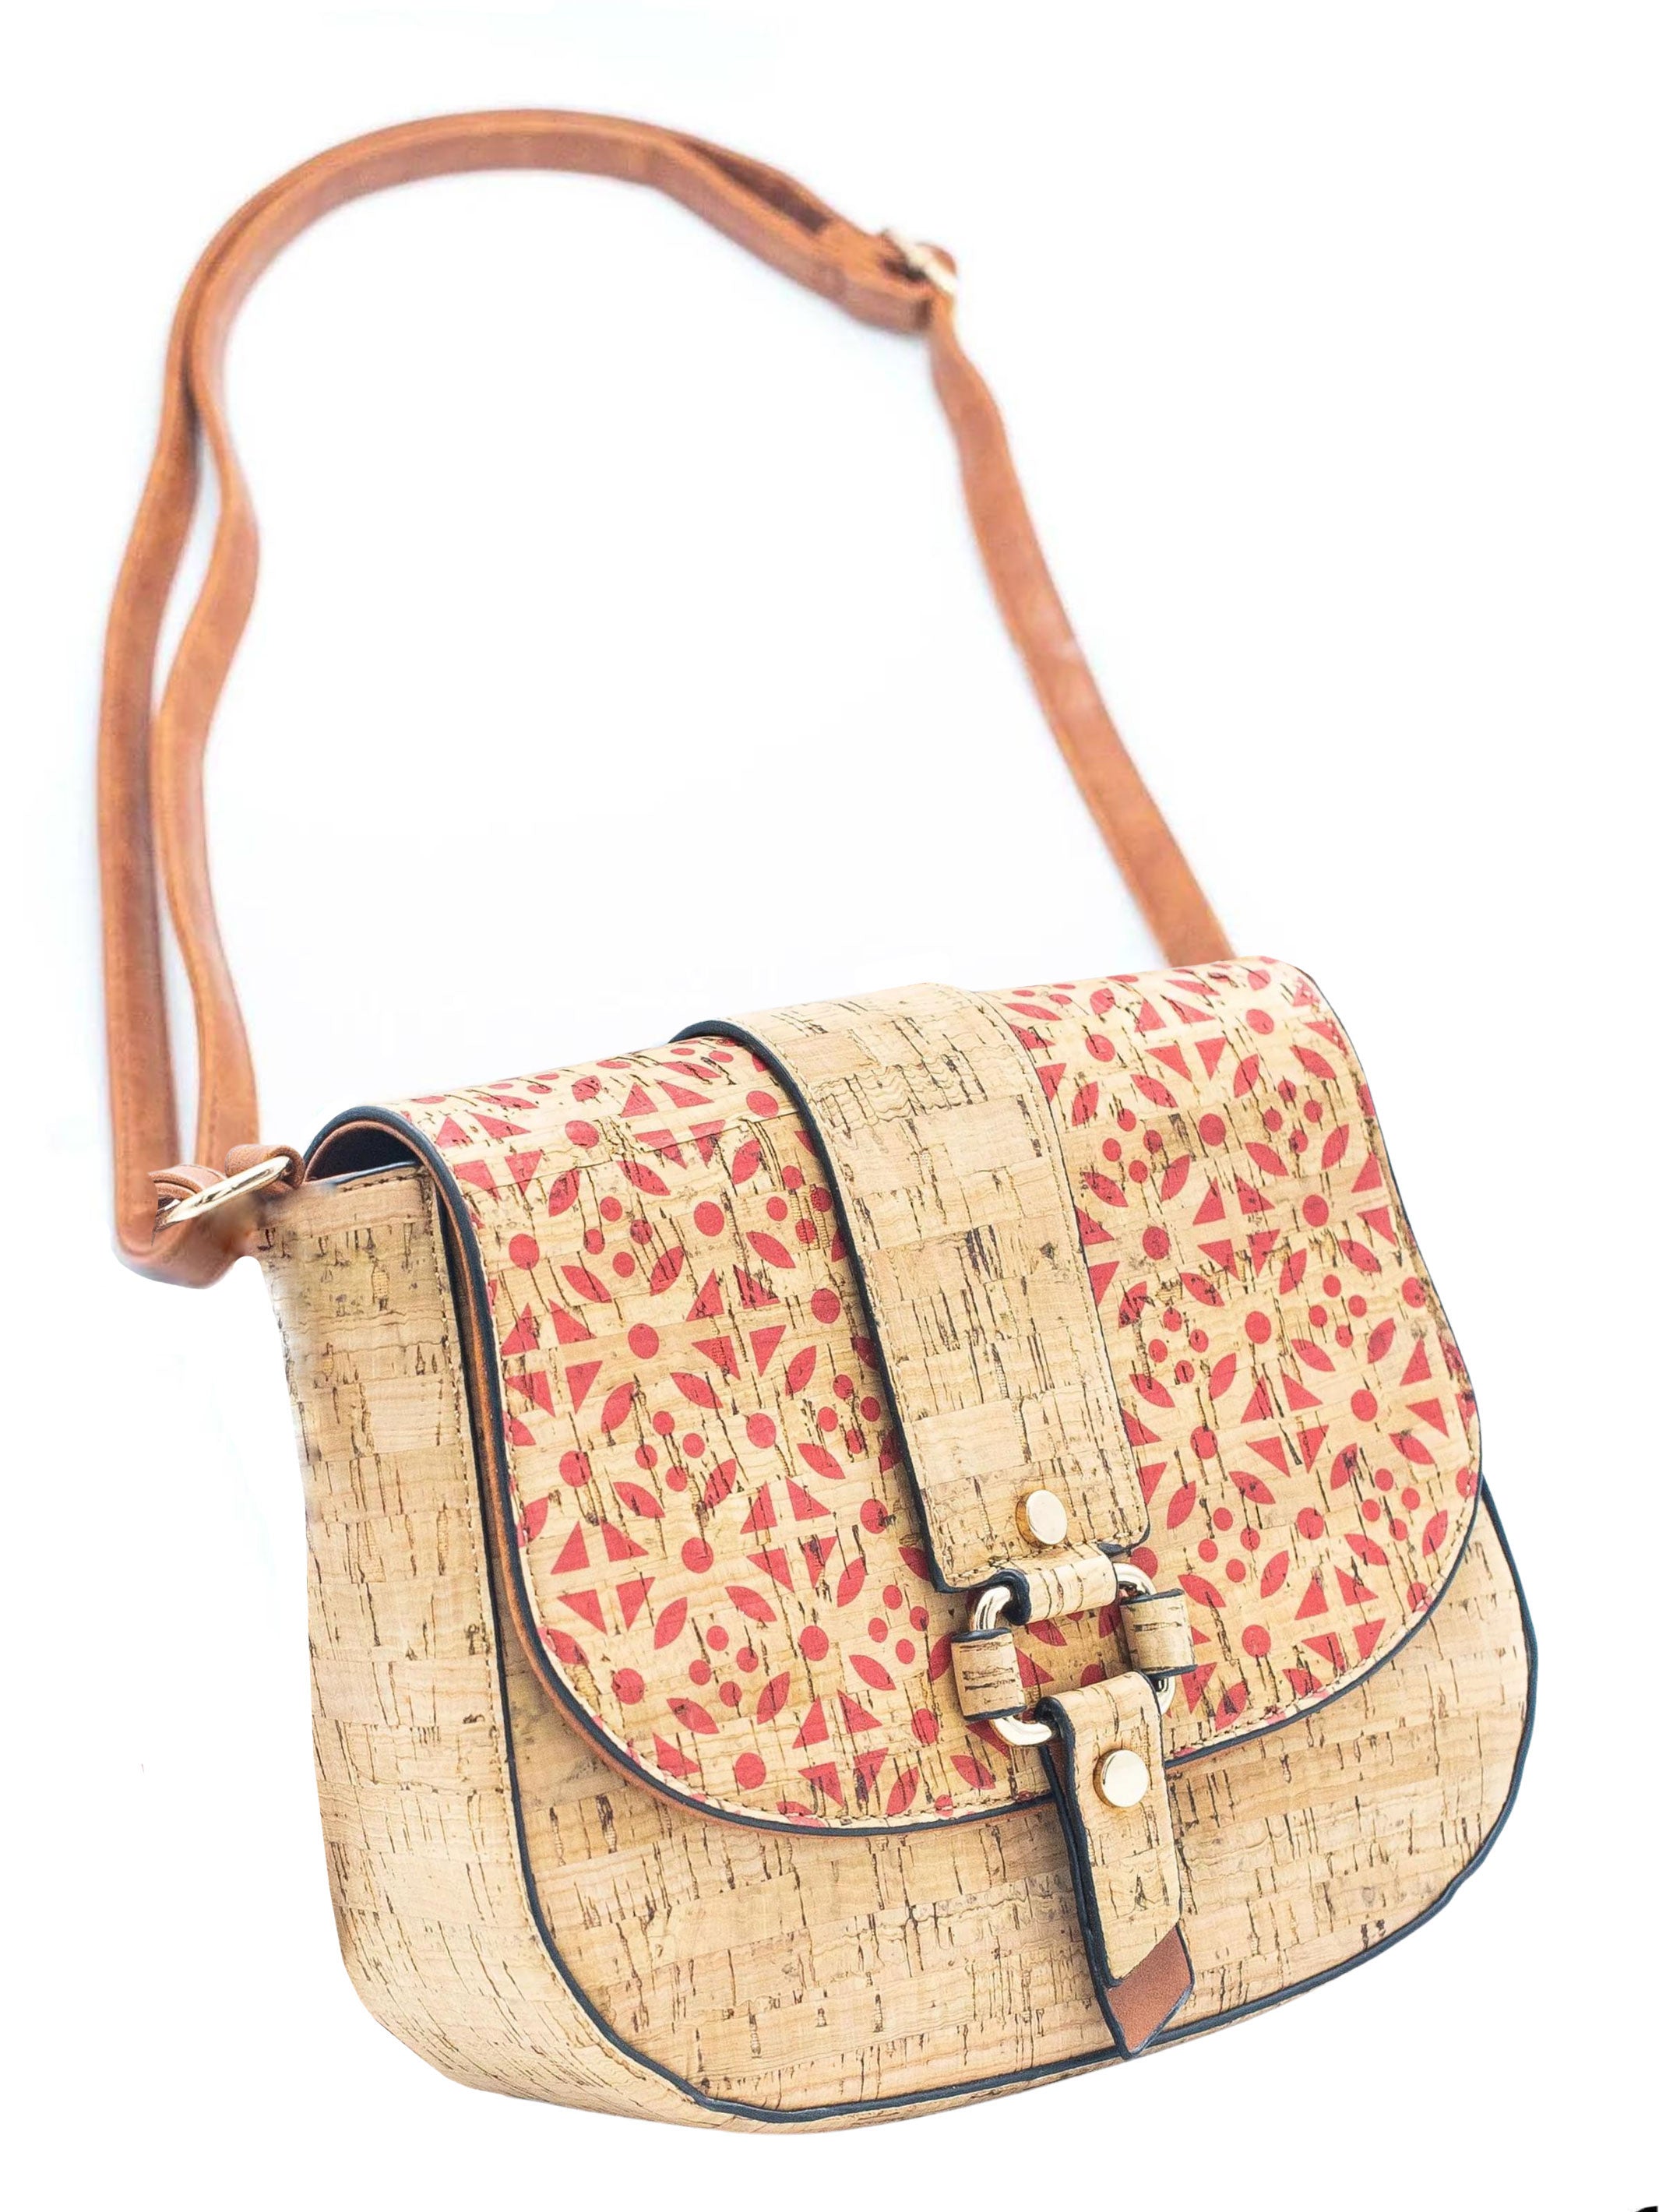 Shop Wholesale Cork bags from Portugal 277 - Dick Smith. .